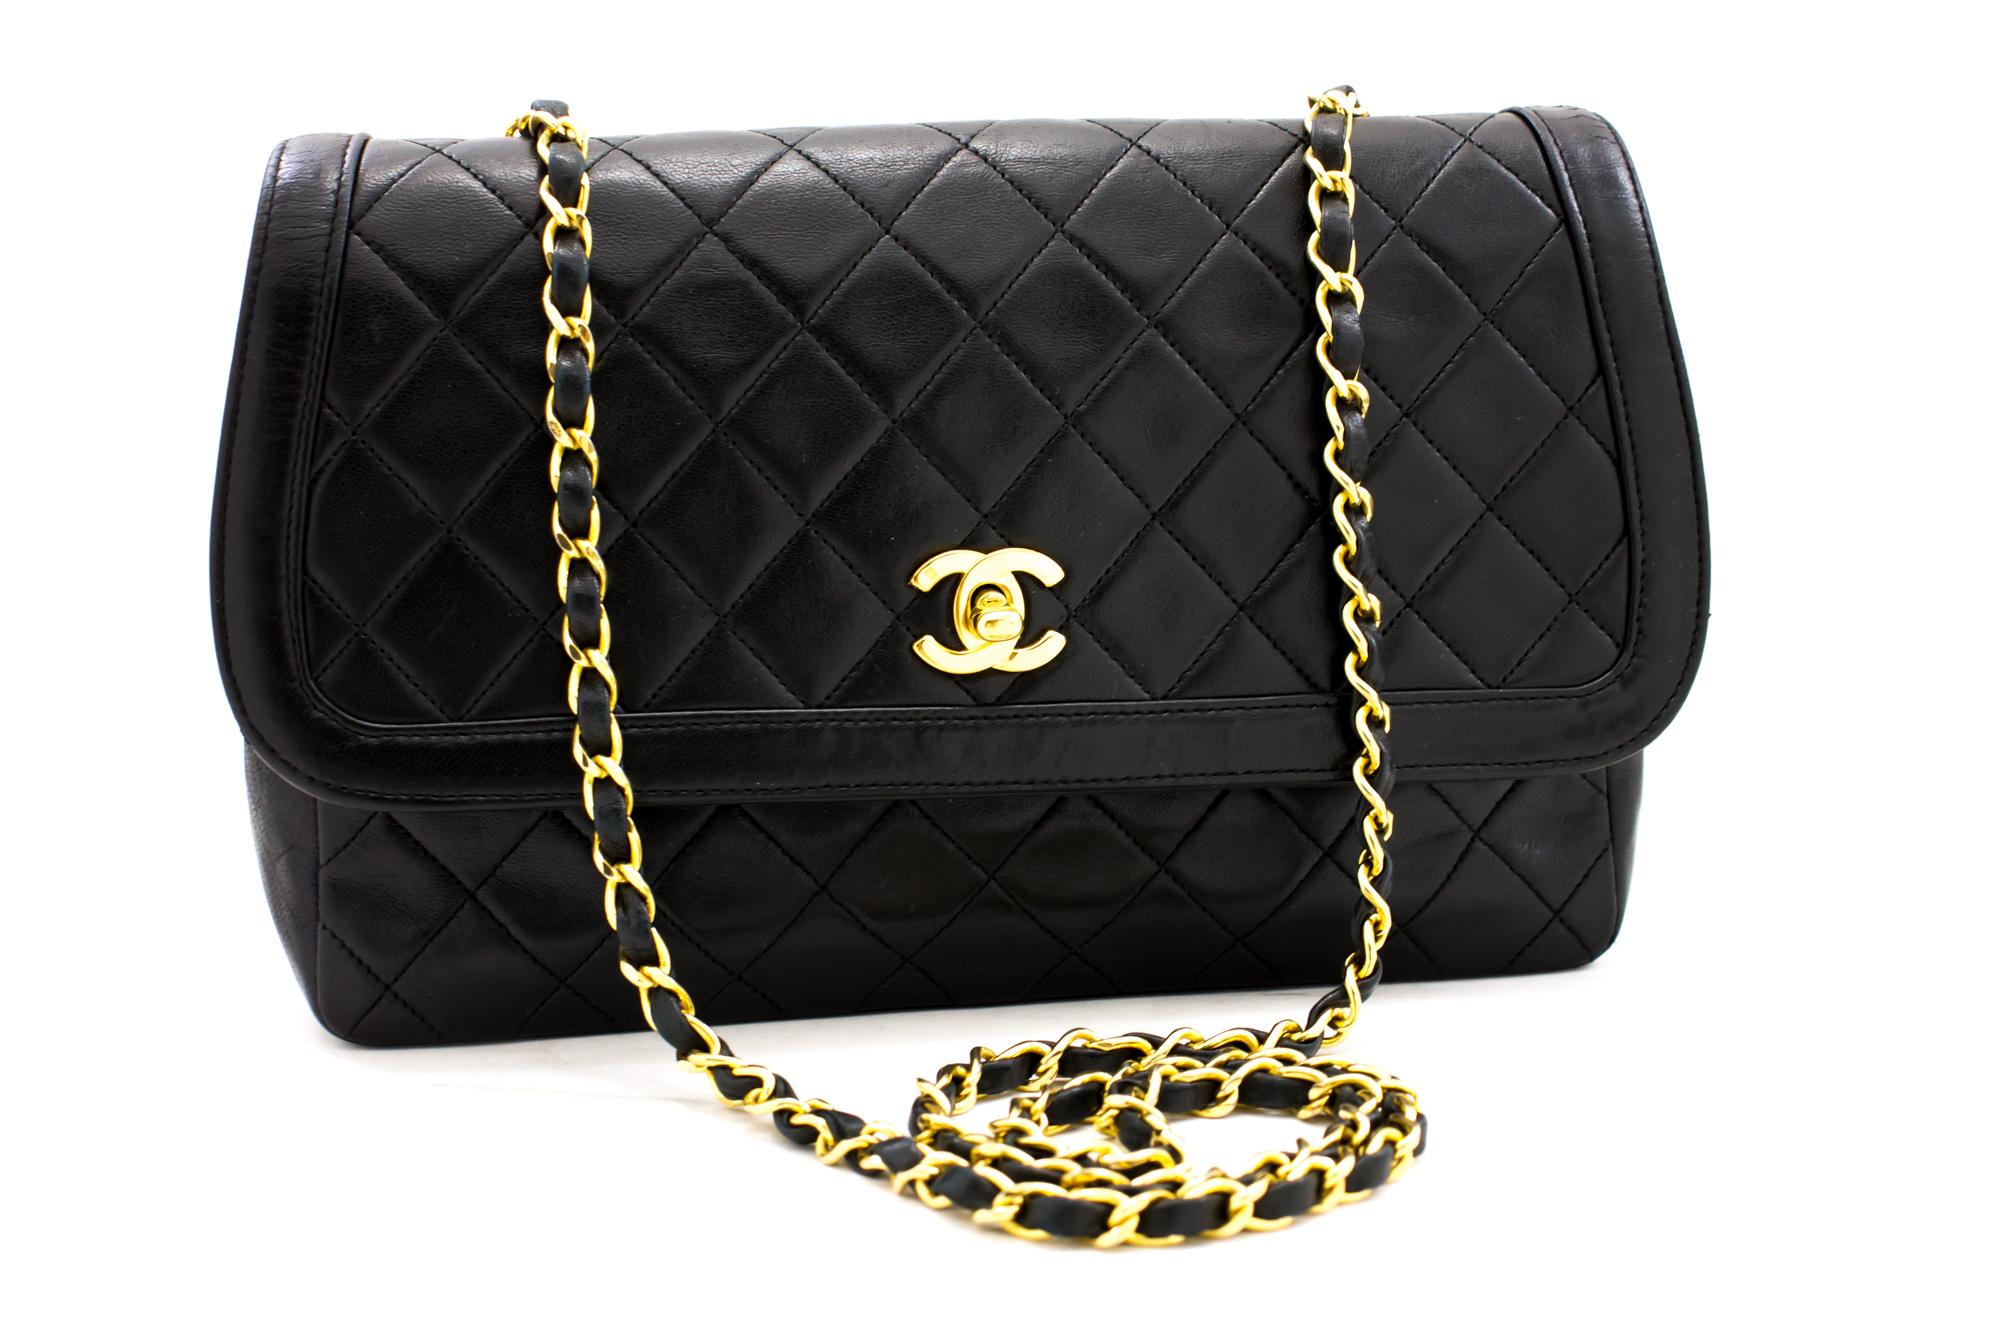 An authentic CHANEL Vintage Classic Chain Shoulder Bag Single Flap Quilted Lamb. The color is Black. The outside material is Leather. The pattern is Solid. This item is Vintage / Classic. The year of manufacture would be 1989-1991.
Conditions &